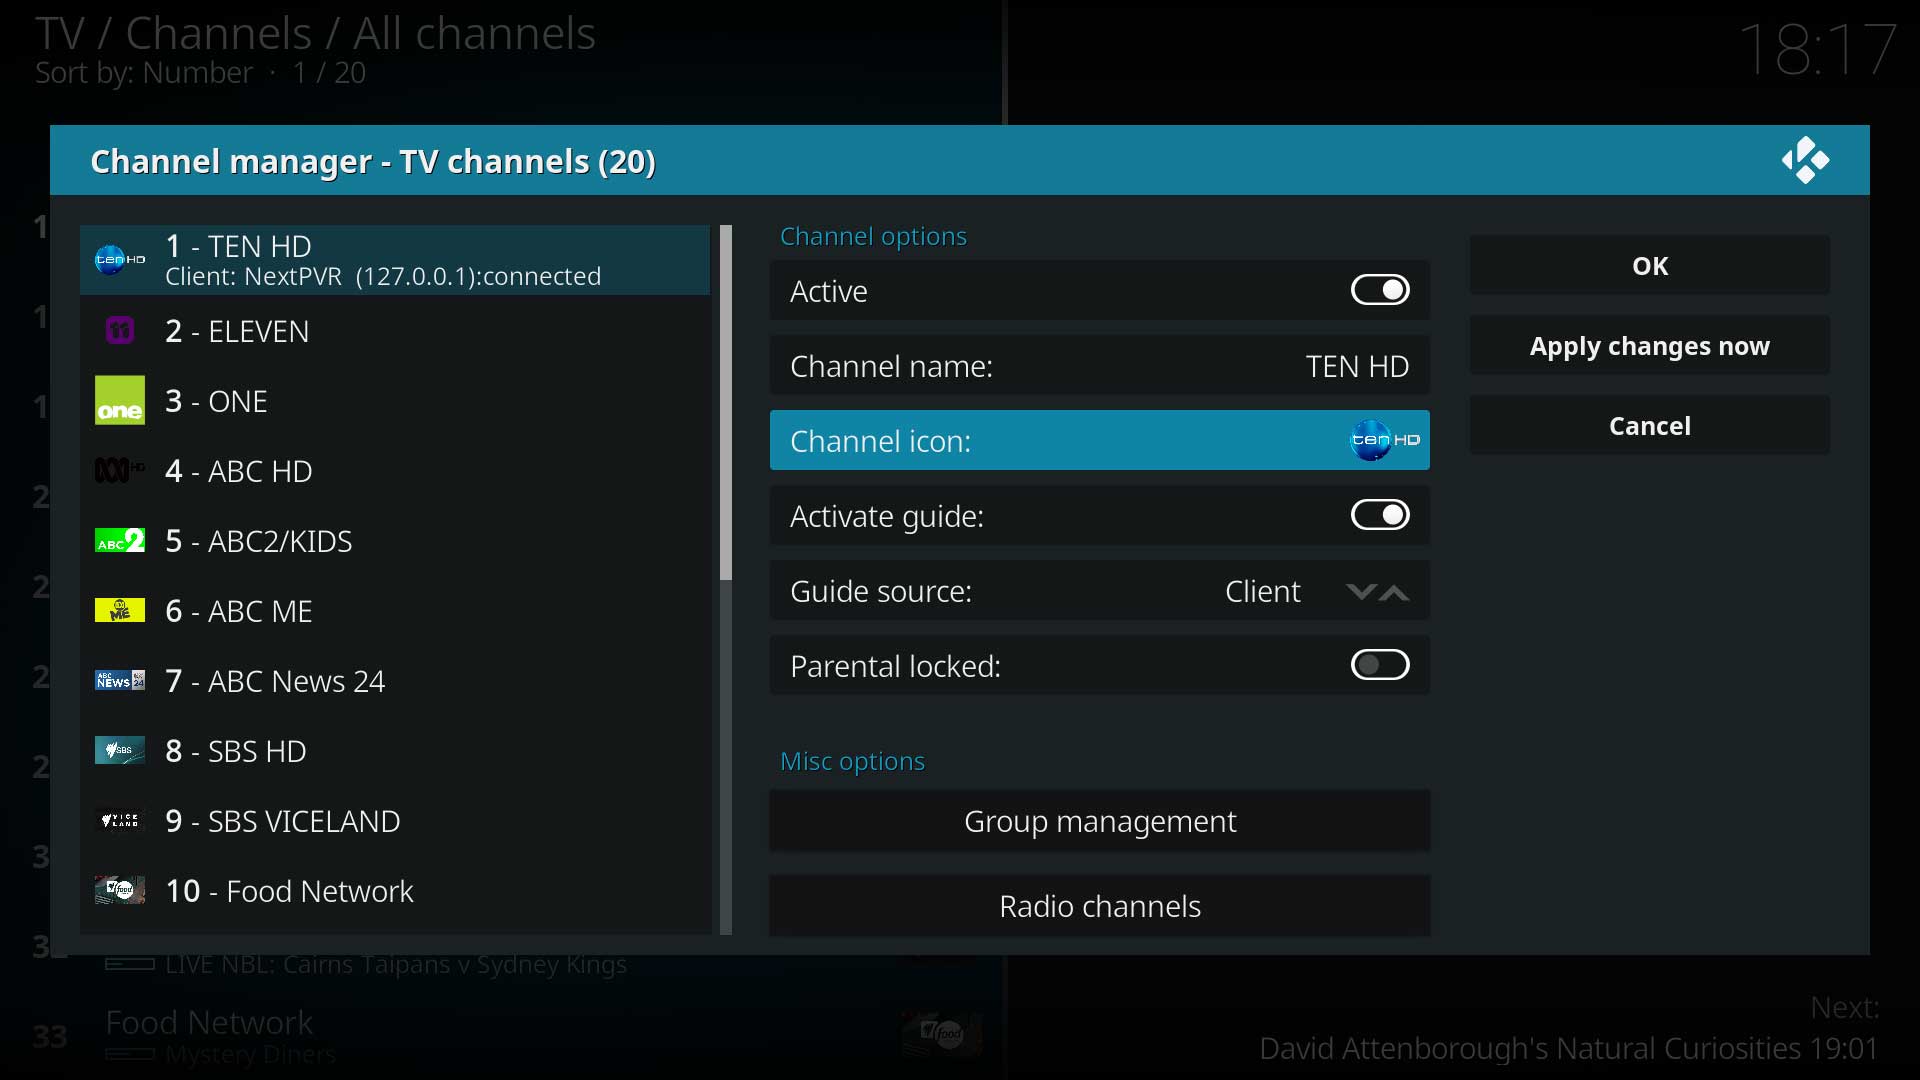 Image 6- Select Channel icon